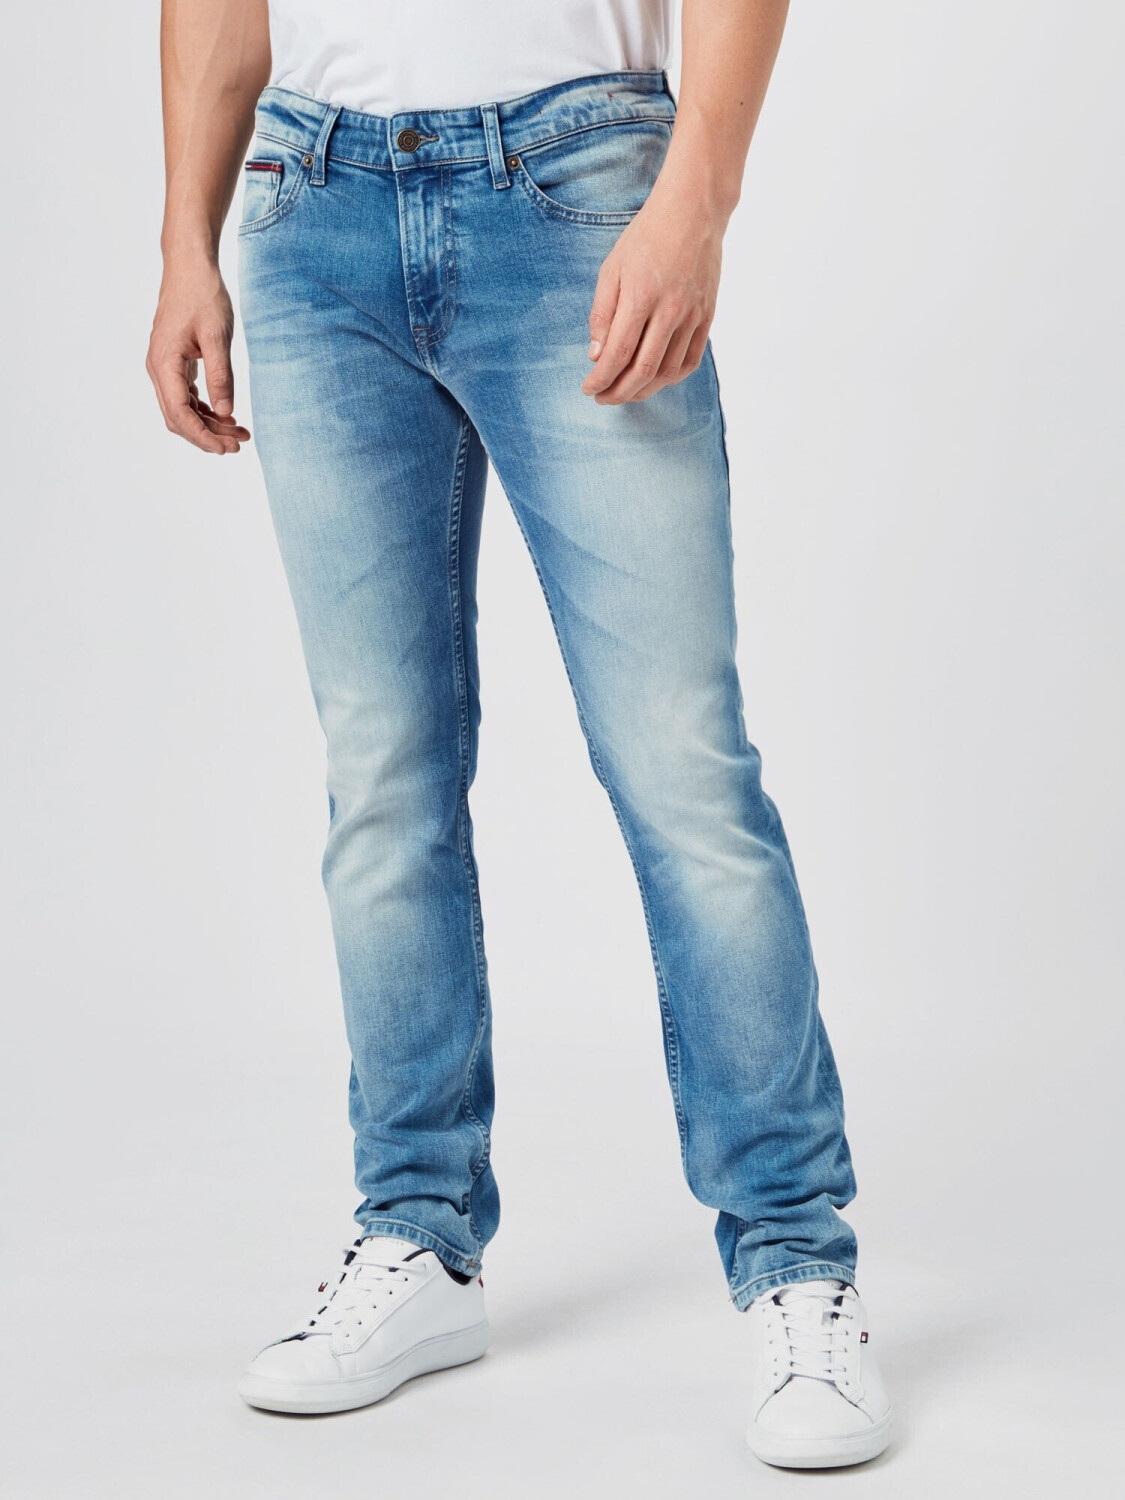 Buy Tommy Hilfiger Scanton Slim Fit Jeans wilson from £56.49 (Today) – Best Deals idealo.co.uk